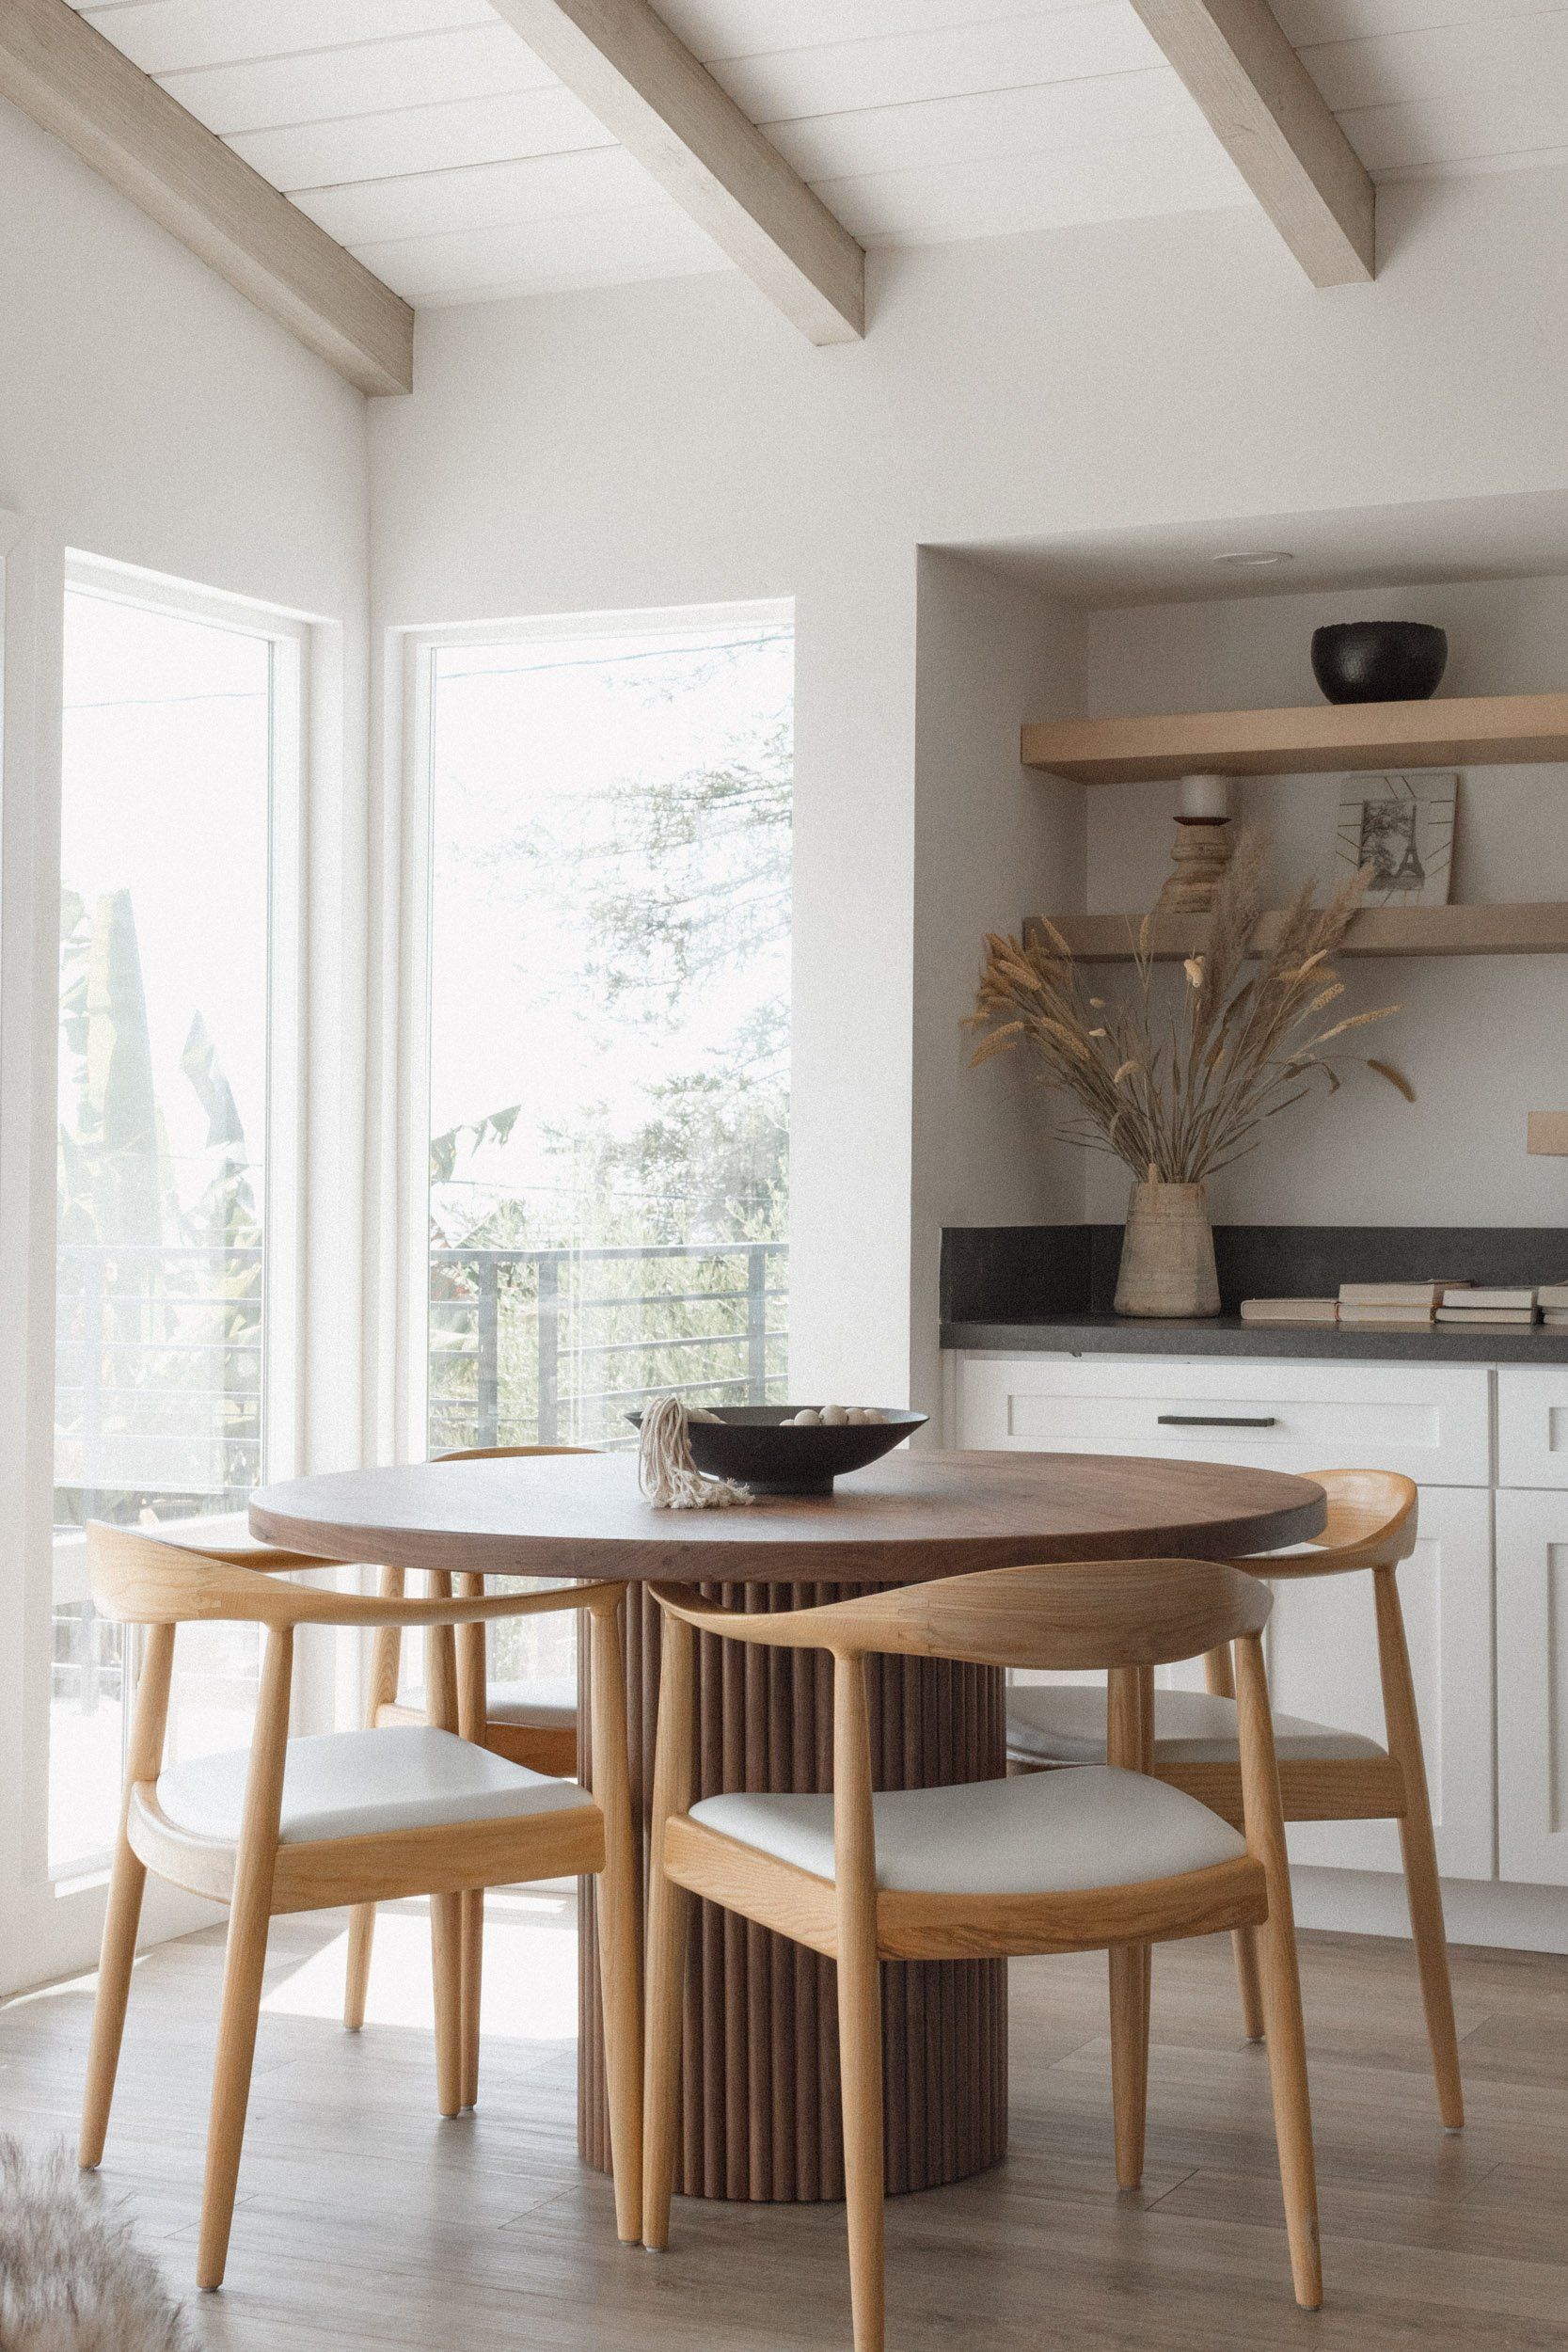 Space-Saving Solutions: The Benefits of a Small Kitchen Table